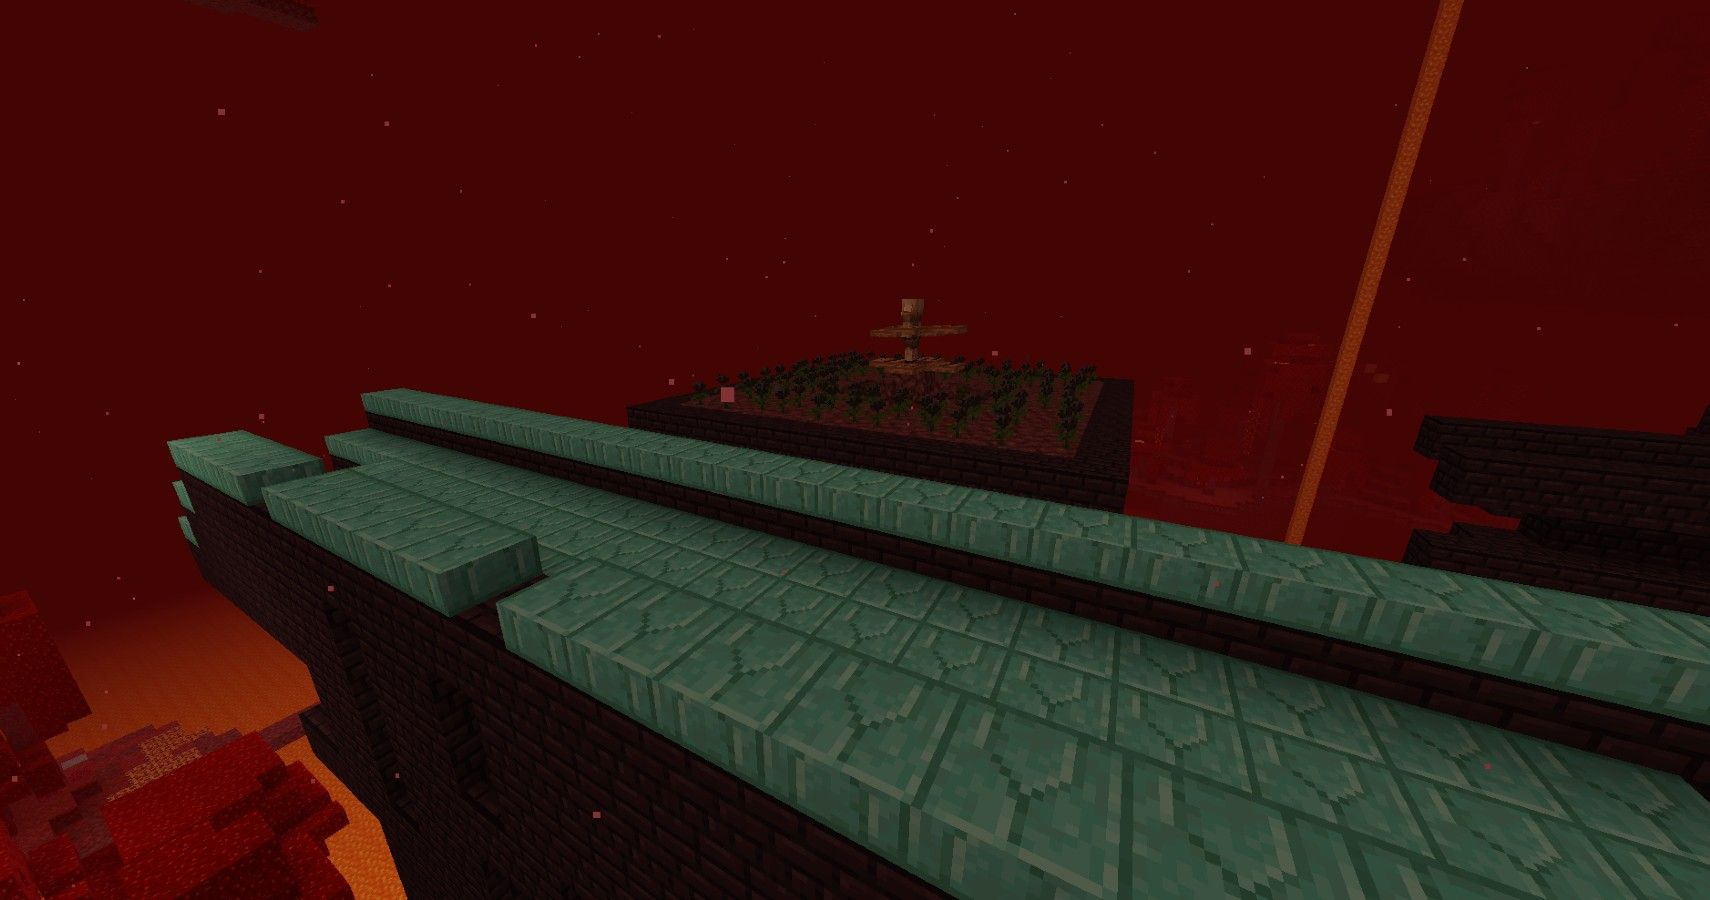 Minecraft Nether realm with slabs added to keep enemies from spawning